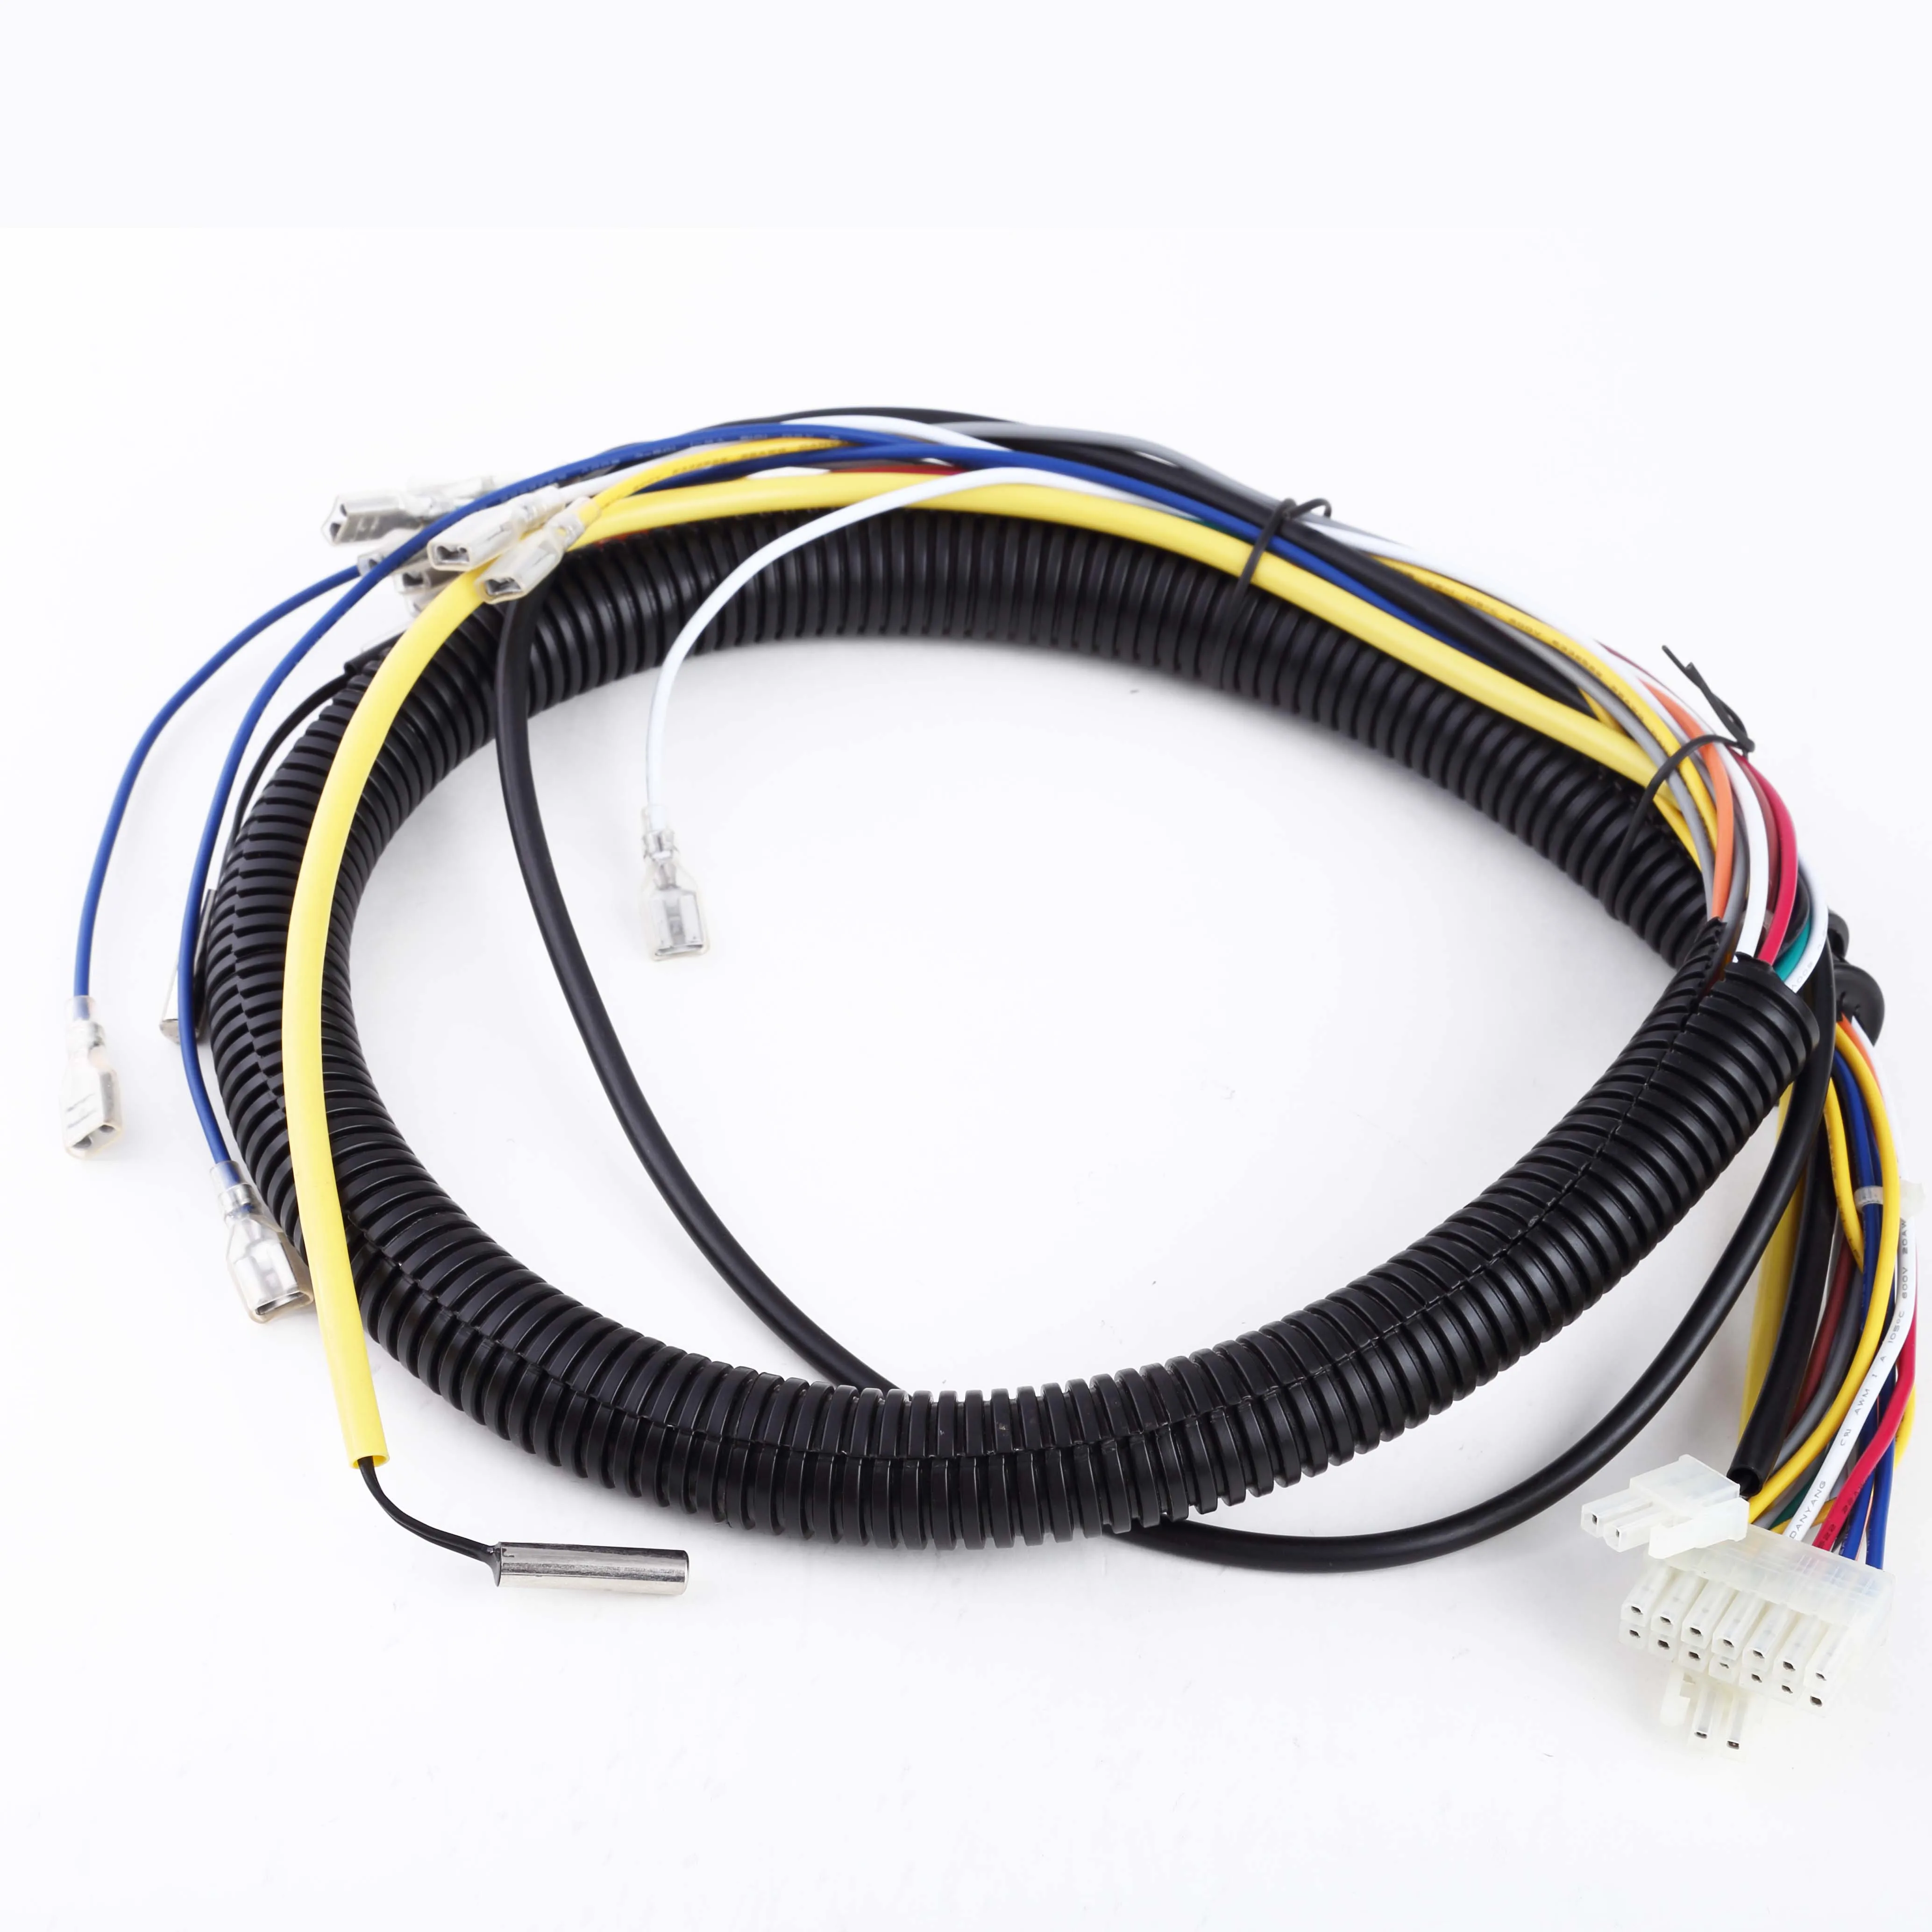 High Quality Custom Made Wire Harness Cable Assembly For Machine Automotive Wire Harness